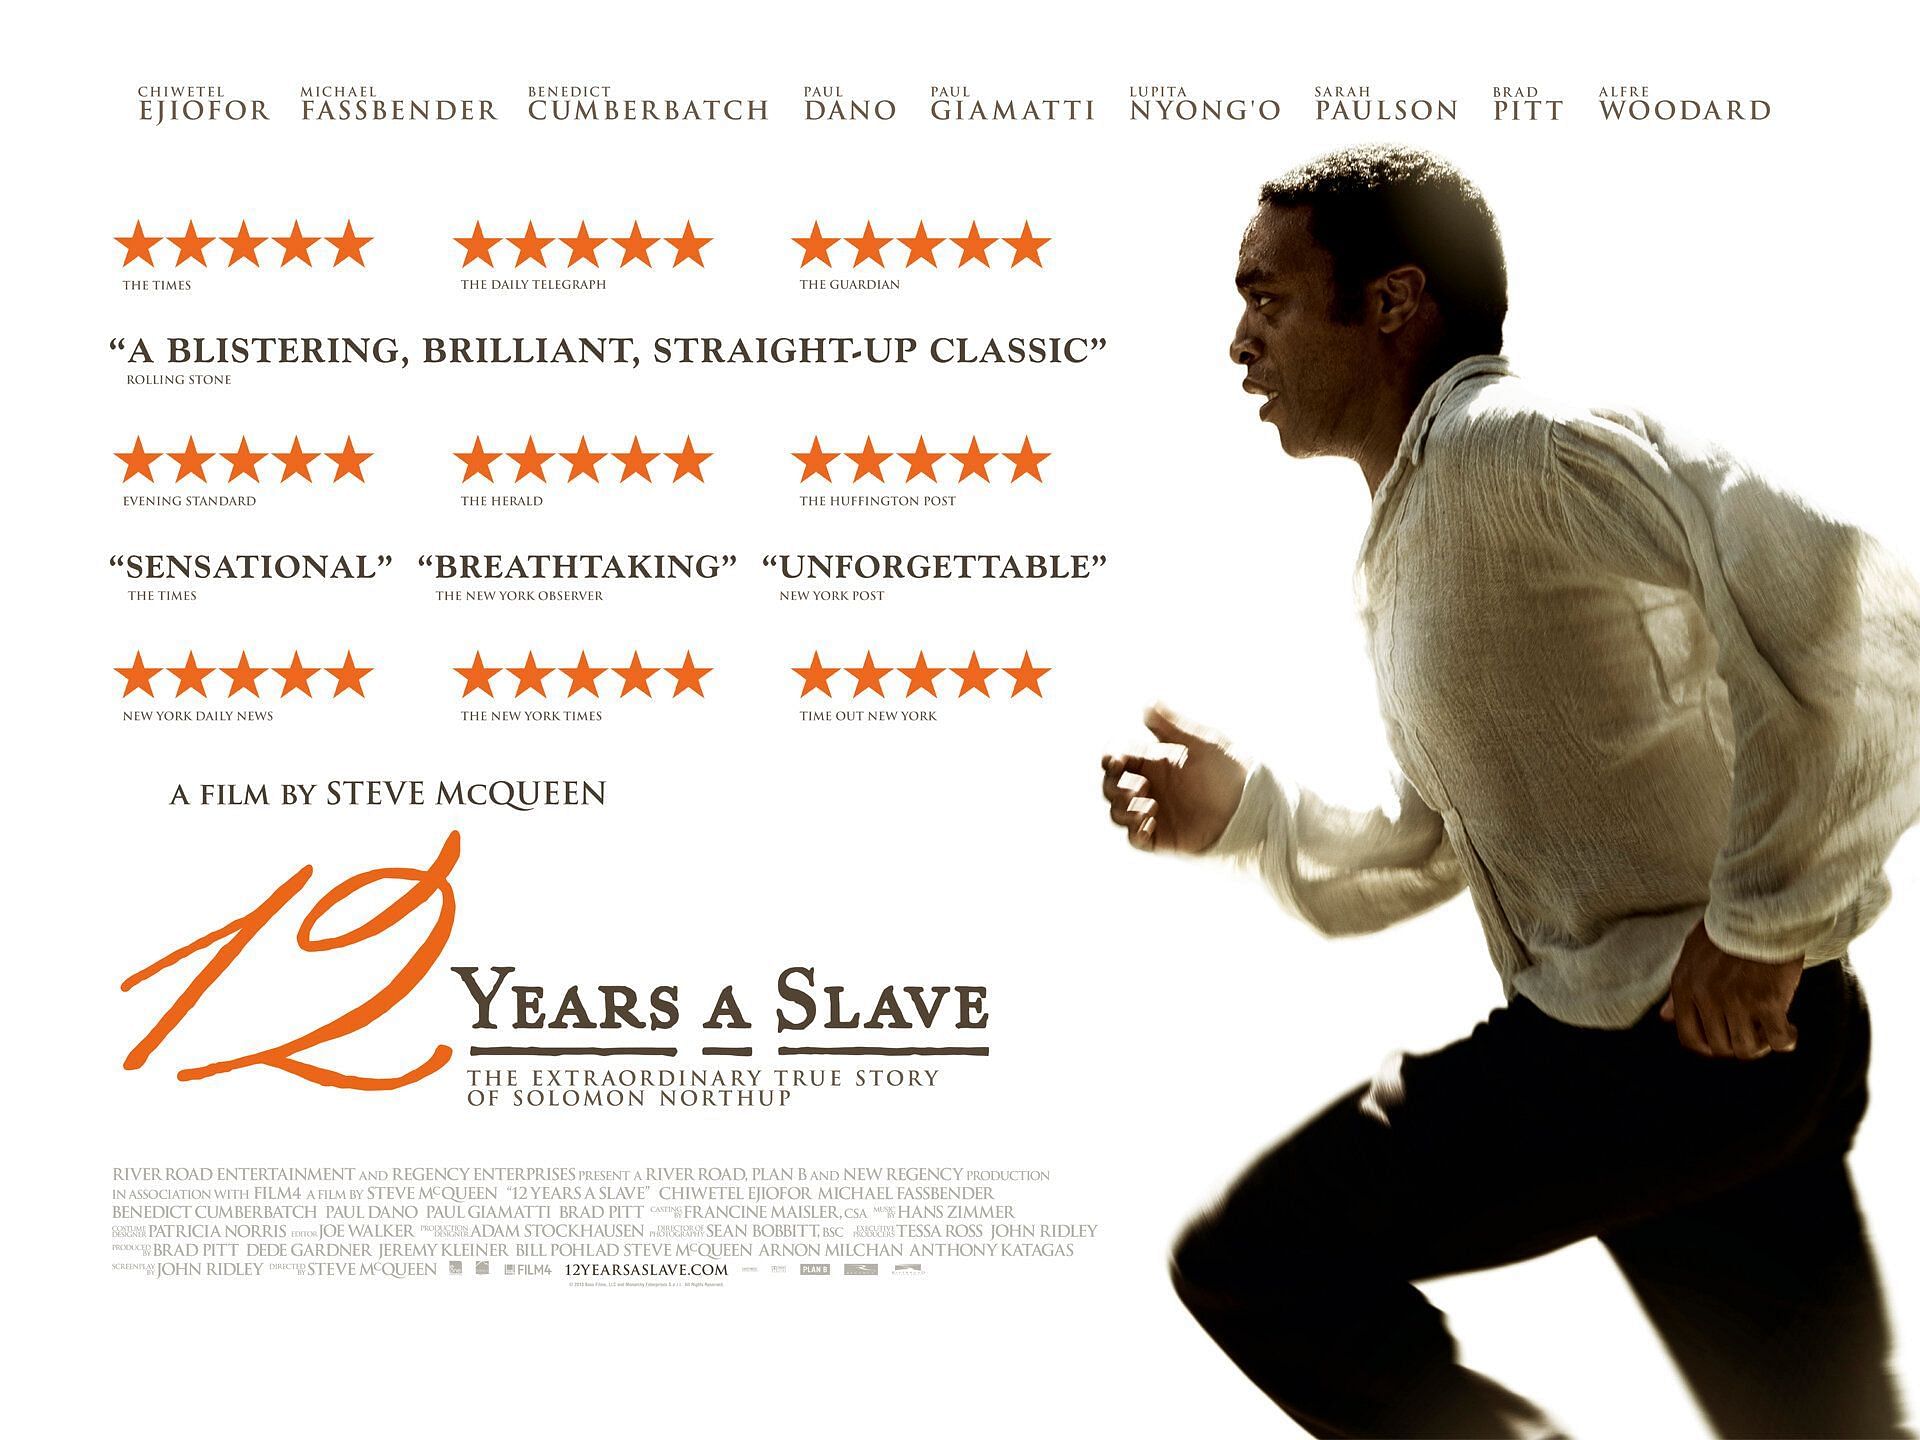 12 Years a Slave (Image via Searchlight Pictures)